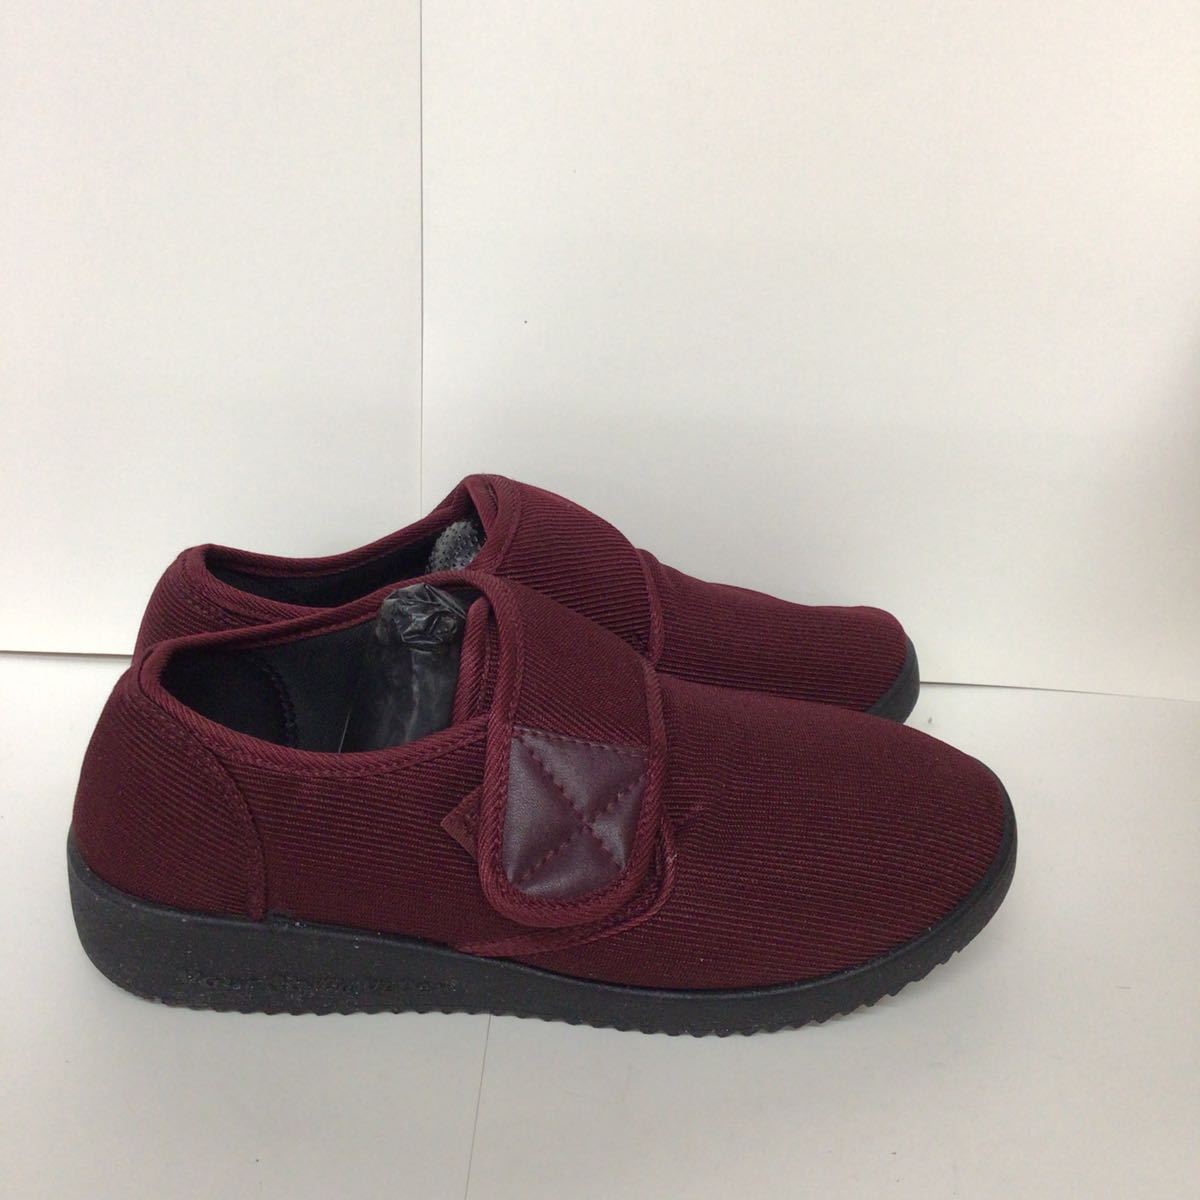 [ selling out! free shipping!]A-330 Velen! shoes!24.5! nursing shoes! red! wine red! put on footwear ...! unused!